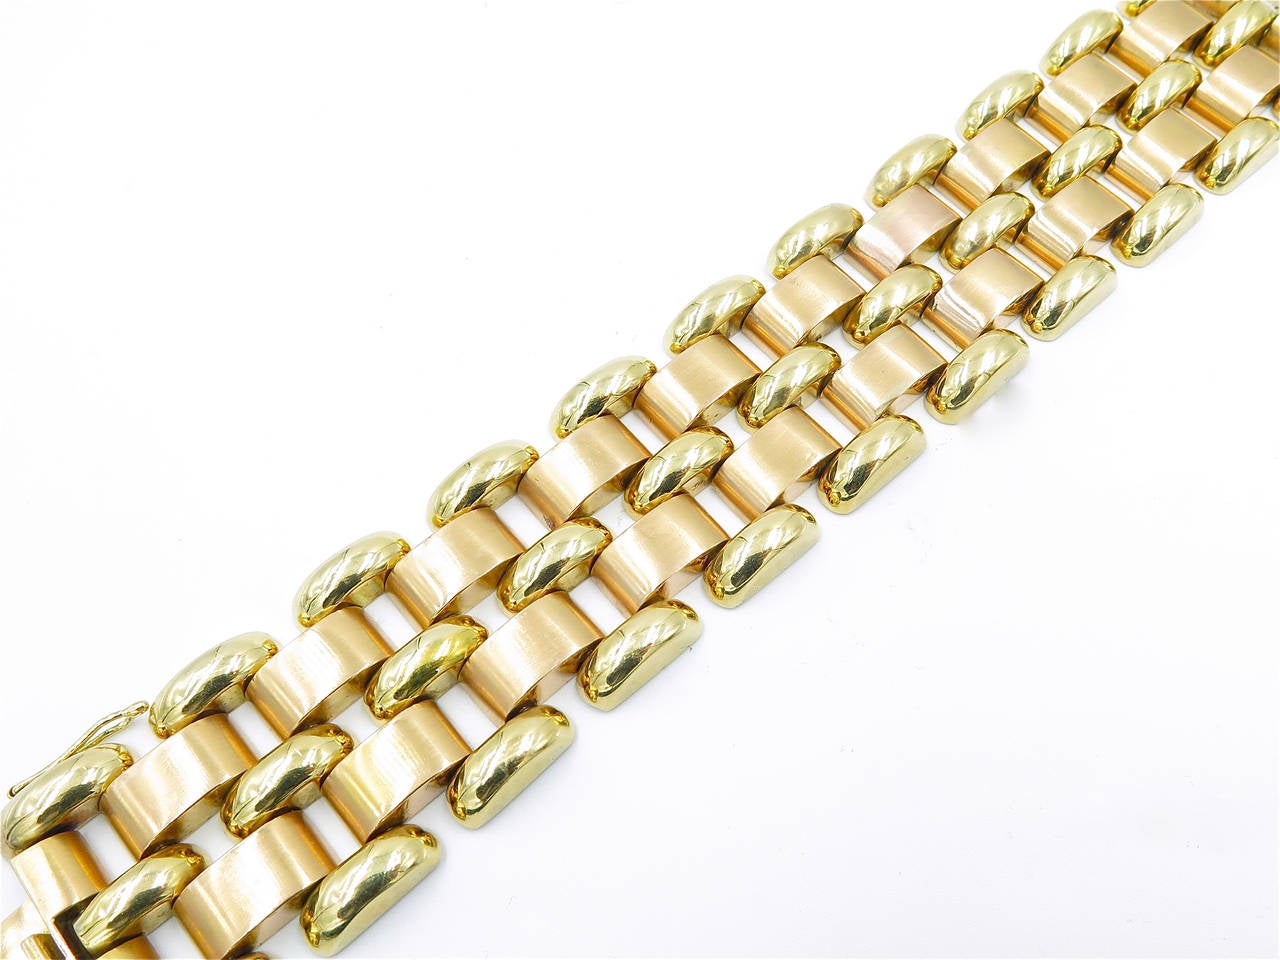 An 18 karat rose and yellow gold bracelet, circa 1940s.  The bracelet is designed as 3 rows of polished yellow gold convex links, alternating with 2 rows of matte rose gold oblong links.  The bracelet has a gross weight of approximately 97.9 grams